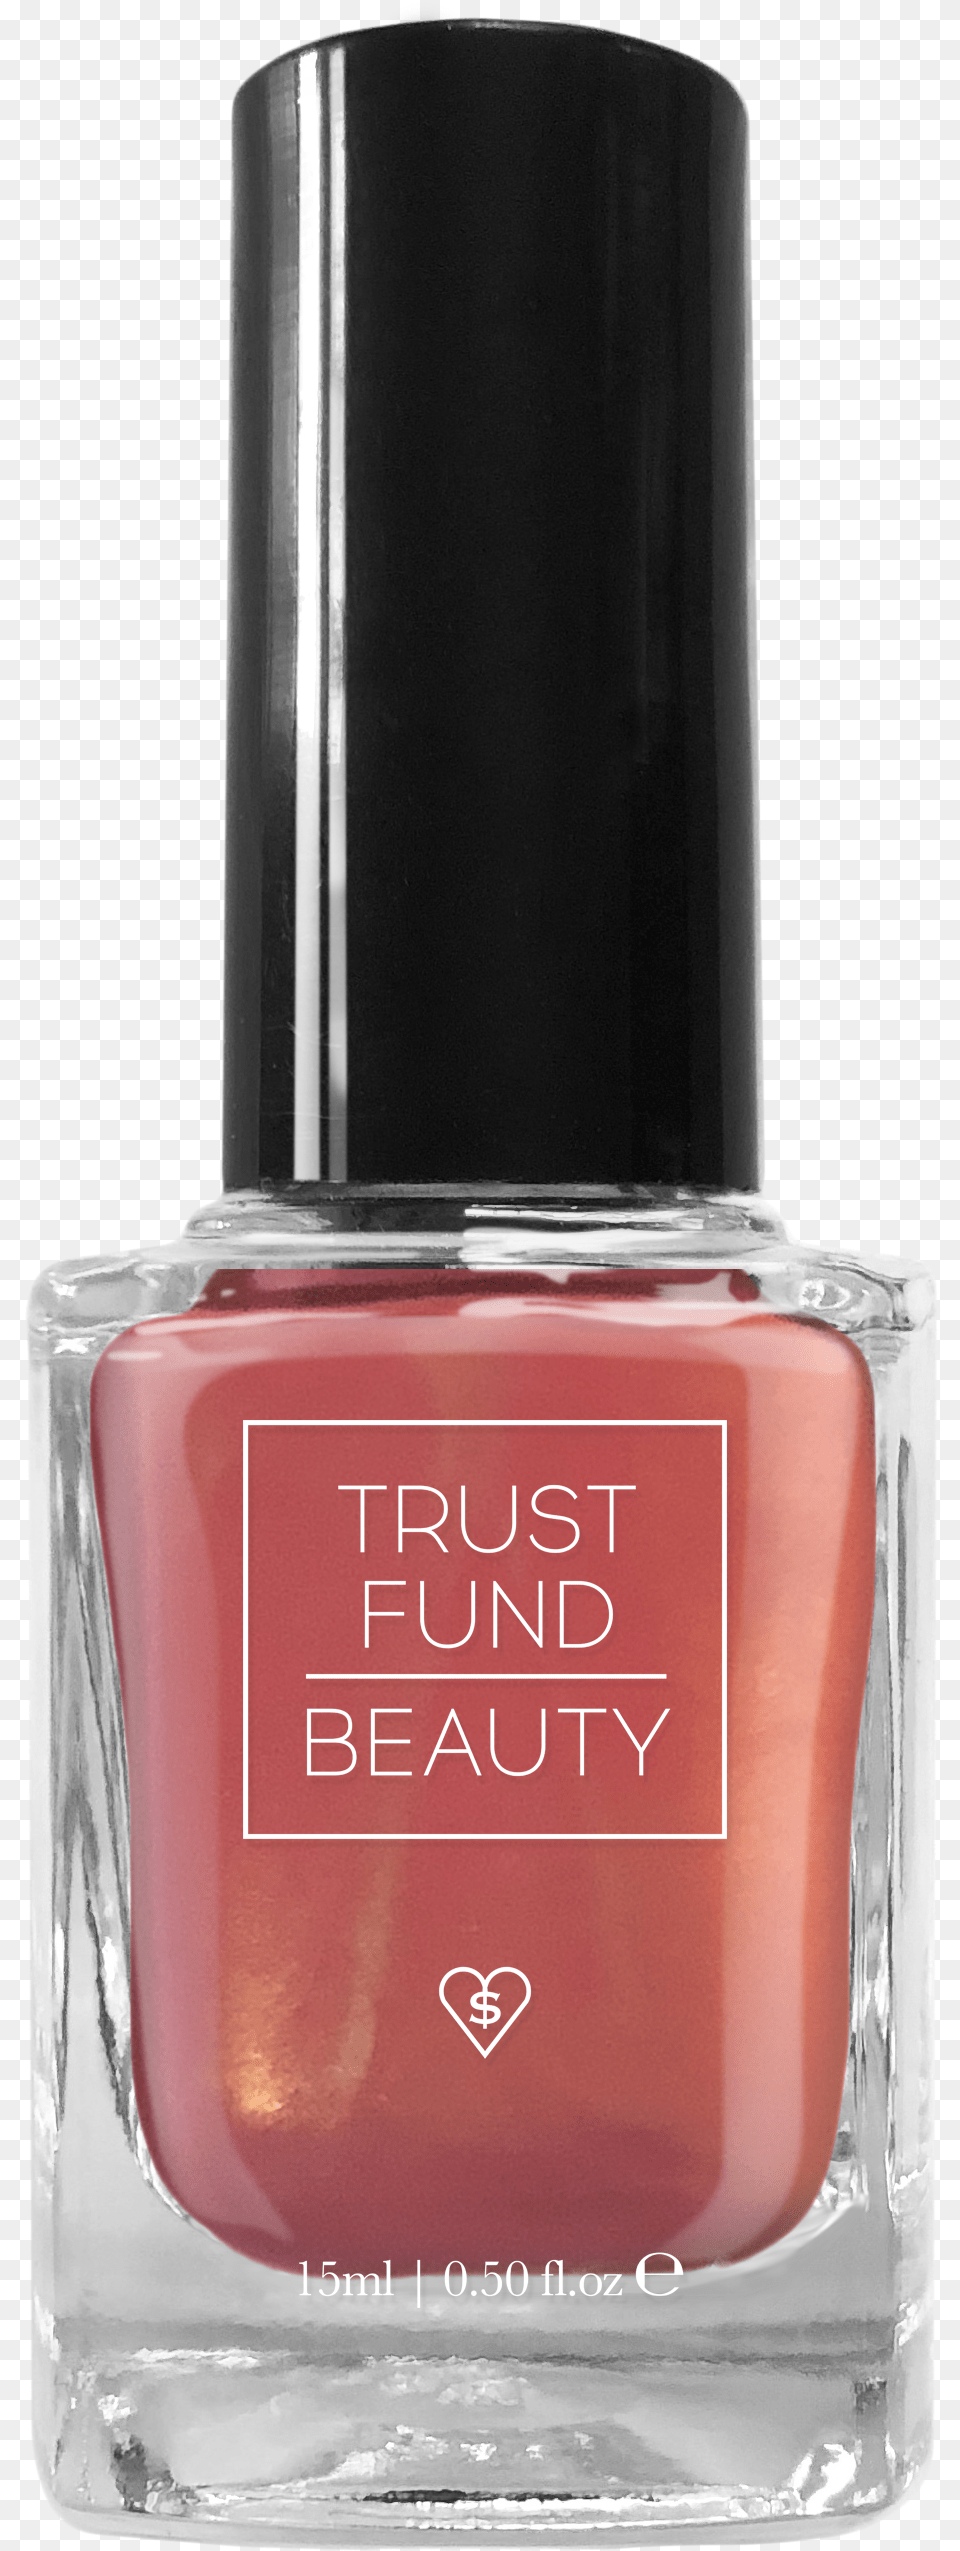 Classy Yet Sassyclass Lazyload Lazyload Fade In, Cosmetics, Bottle, Perfume, Nail Polish Png